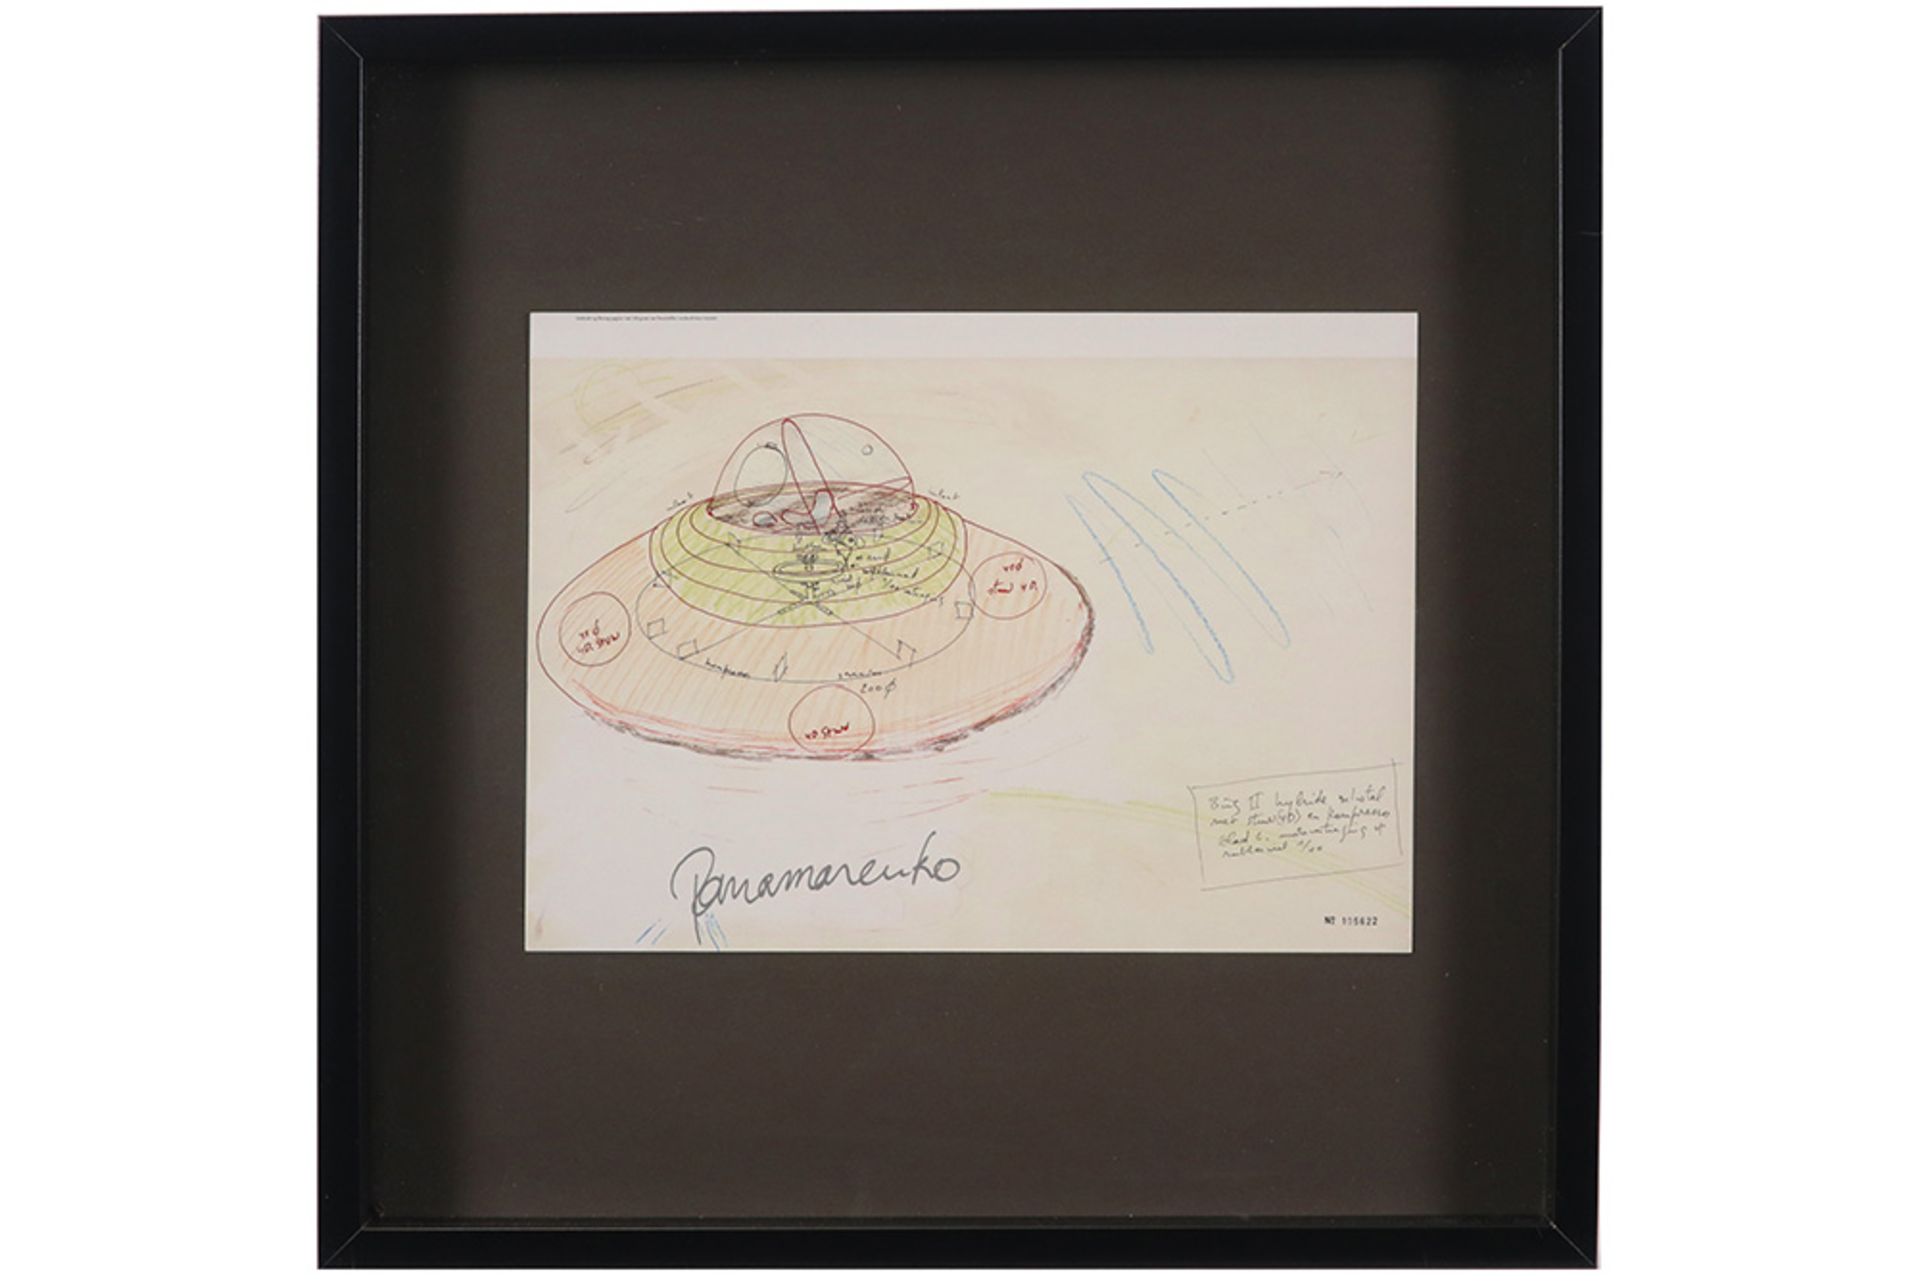 Panamarenko "Bing II hybrid dish" print in colors - signed in the print sold with the paper dd - Image 3 of 3